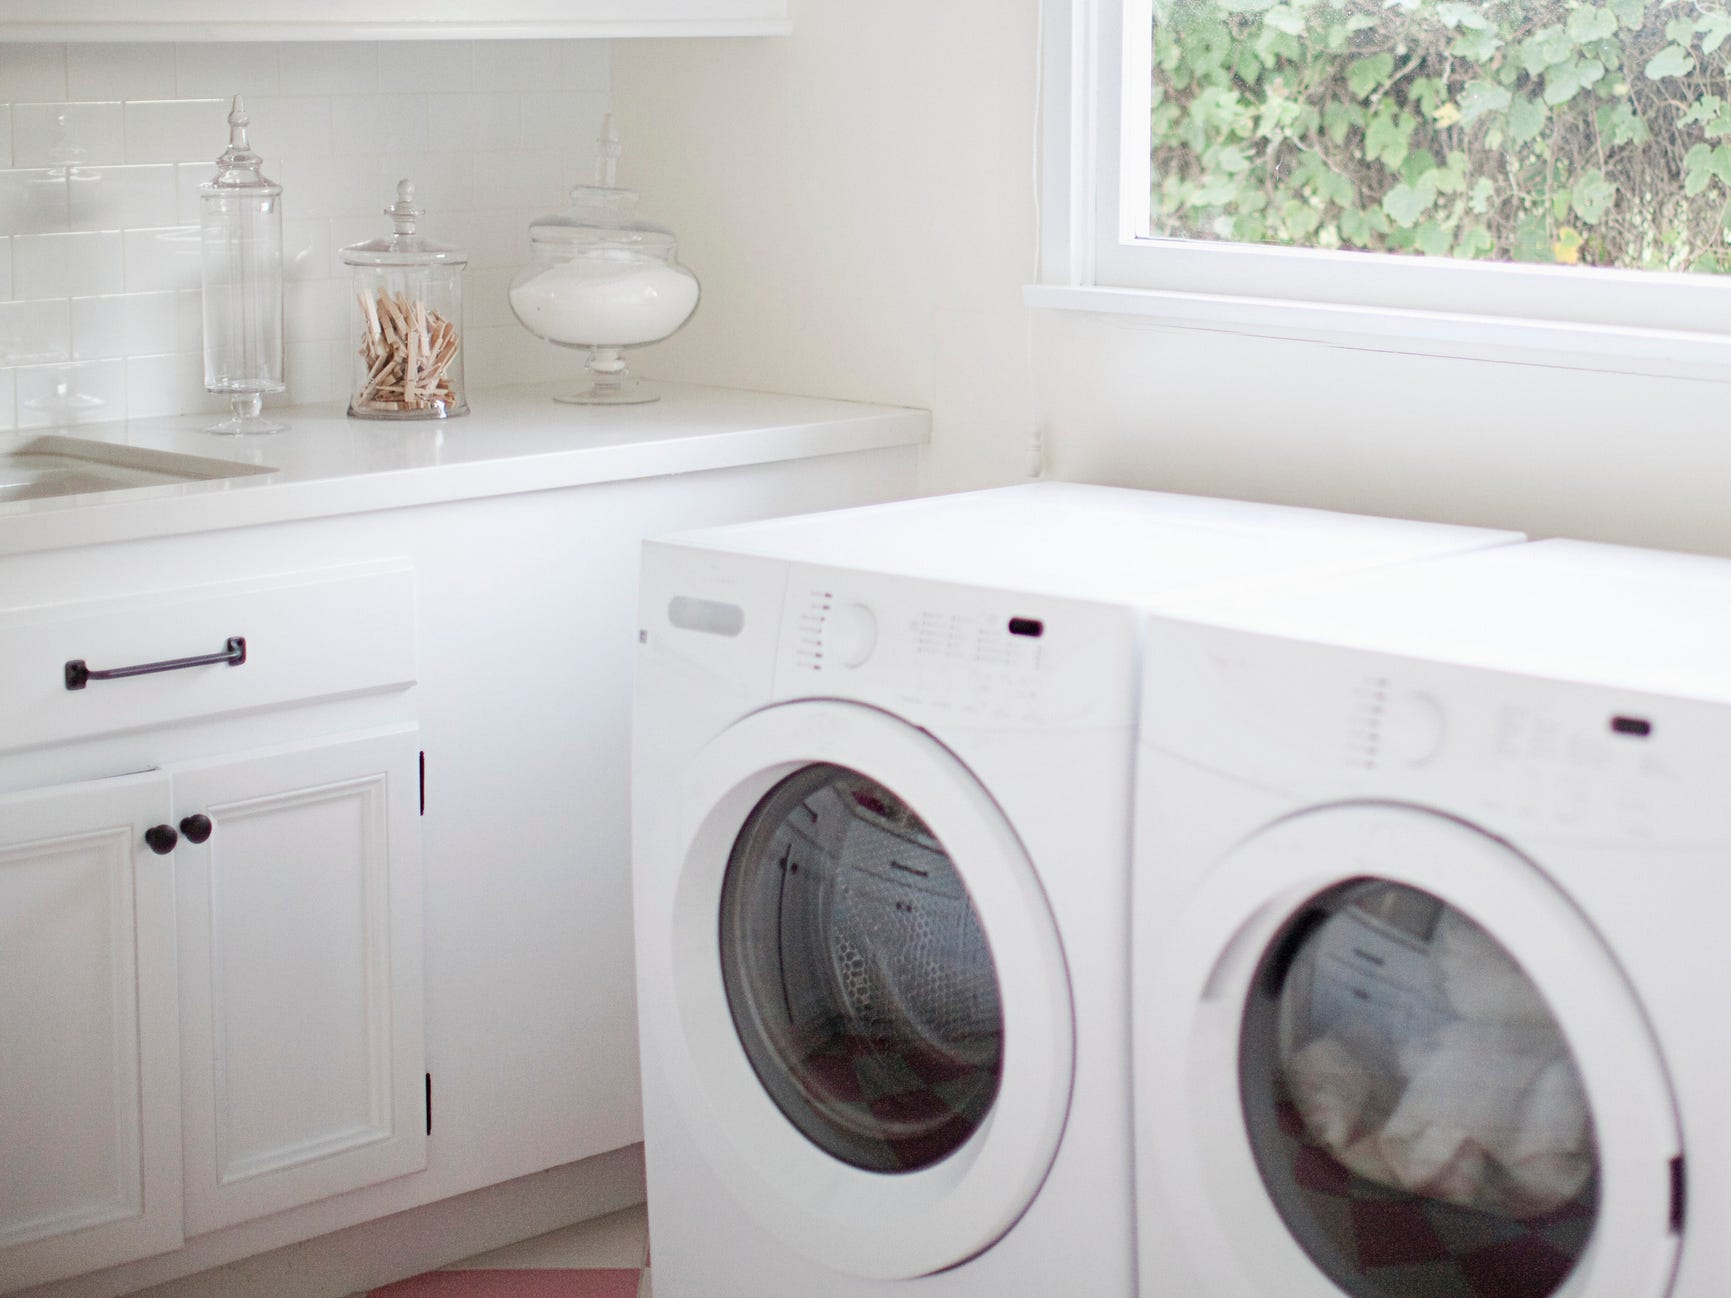 How To Make Your Laundry Room Look Better (And Actually Enjoy Laundry Day)  - Emily Henderson